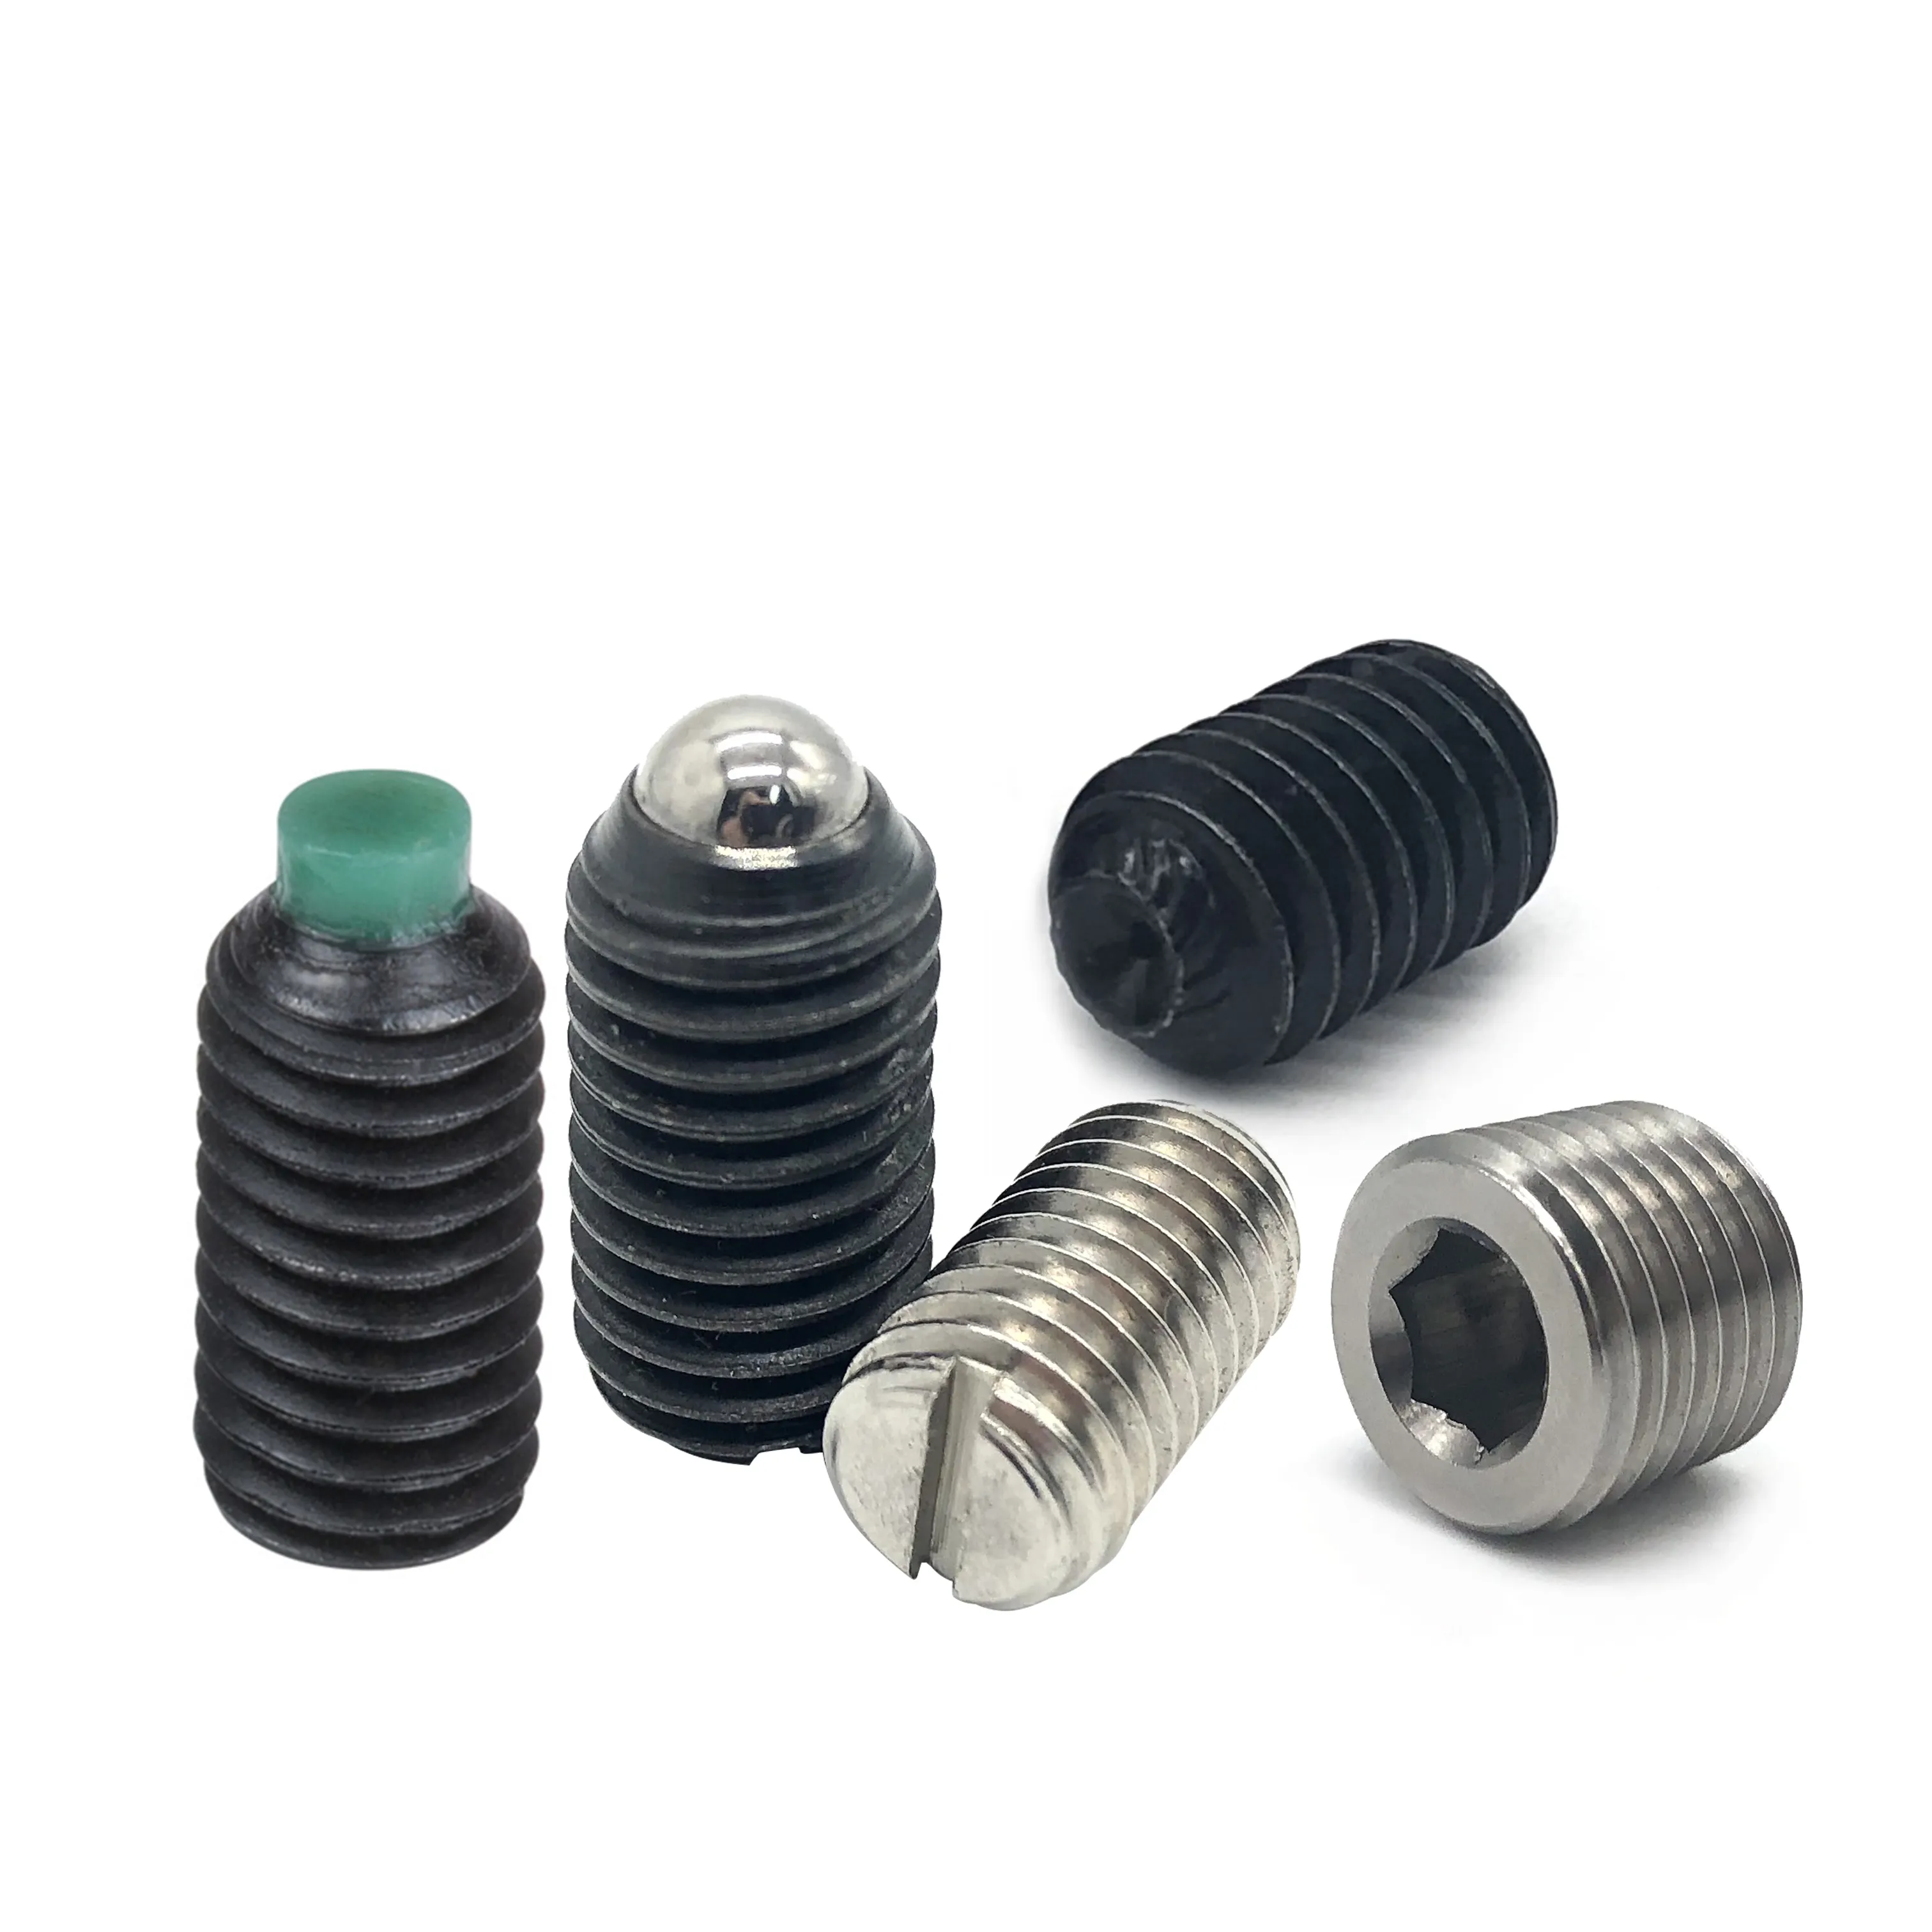 China wholesale custom flat point hollow hexagon screw Stainless steel 304 hex socket allen nose grub screw slotted set screw